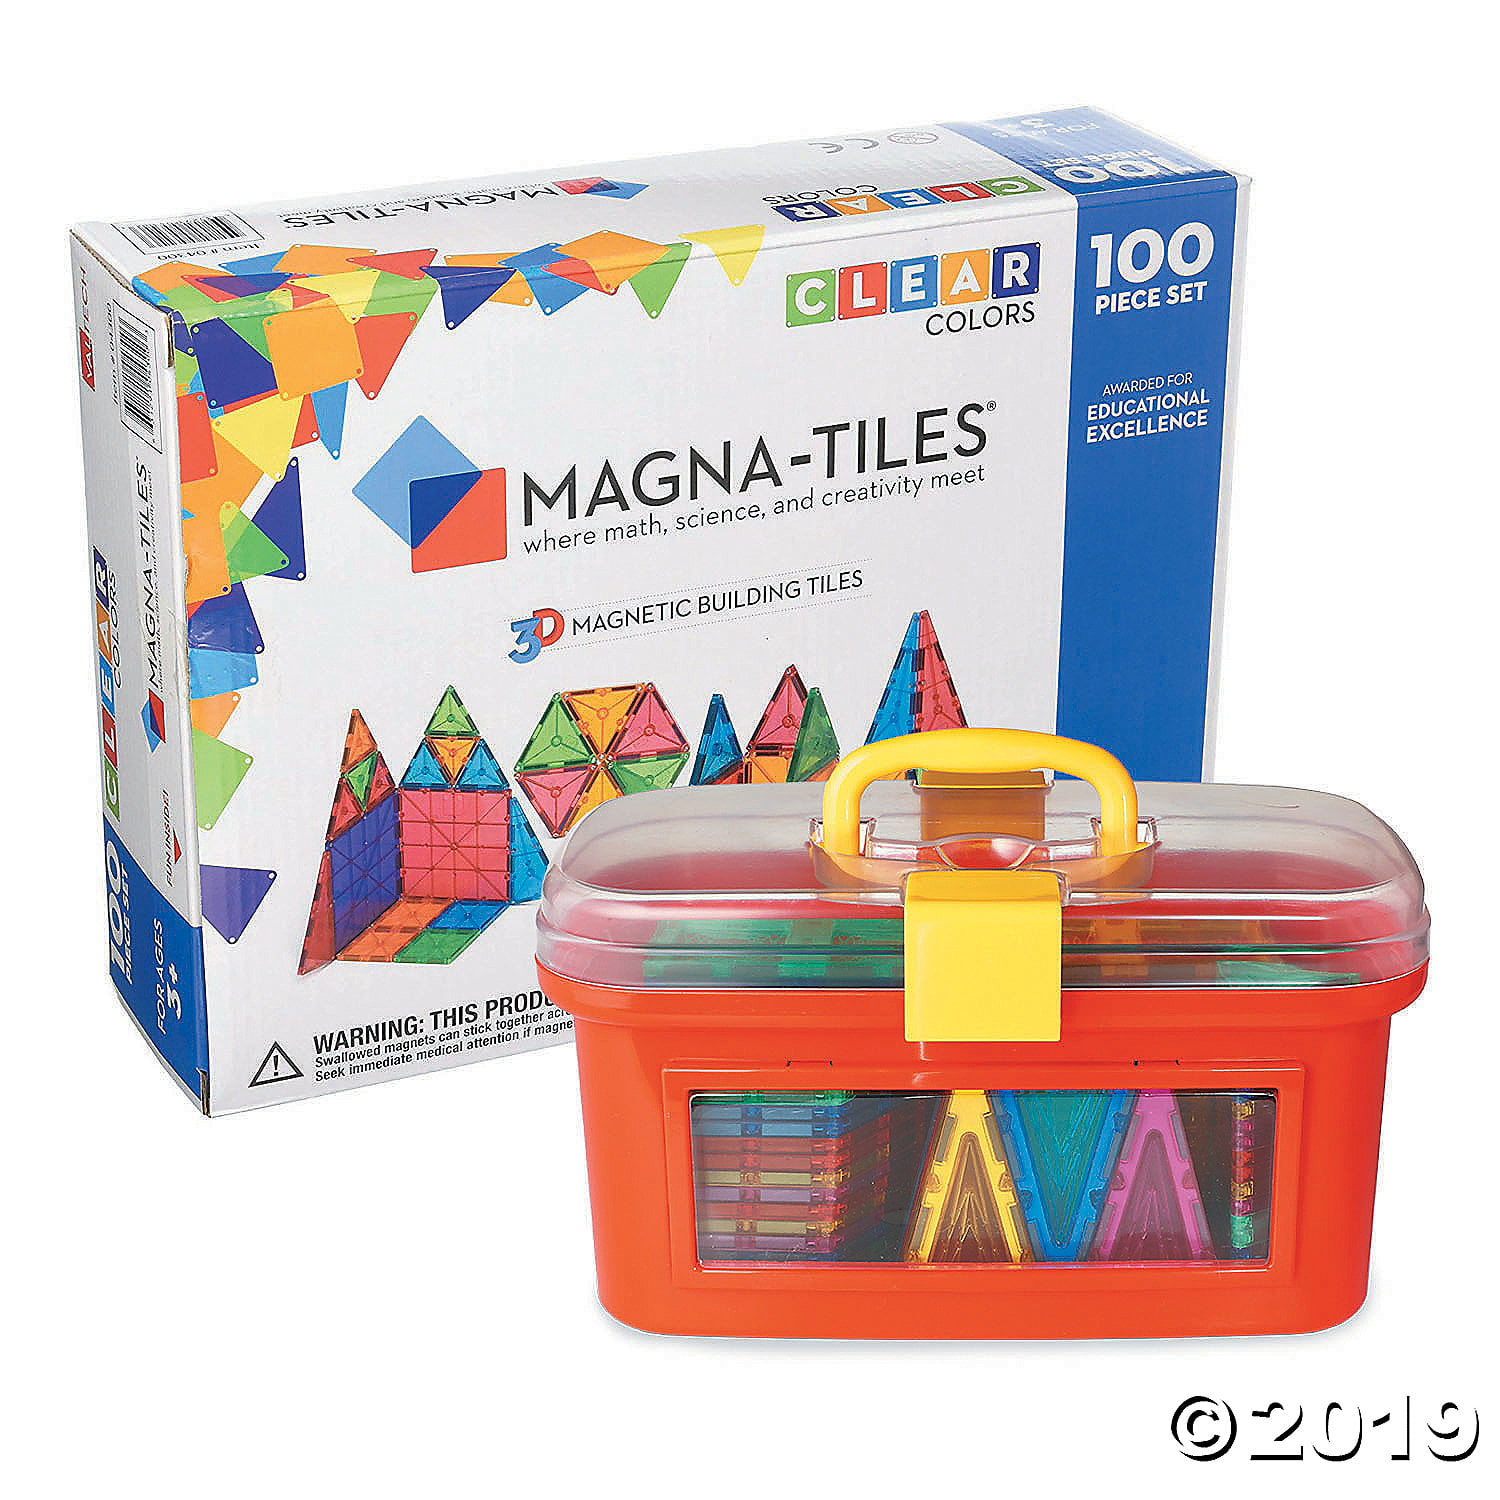 Educational Toy for Boys and Girls Storage Box IgenToys Magnetic Blocks for Kids: Includes 100 Colorful Magnetic Tiles and Building Booklet 100 PCS